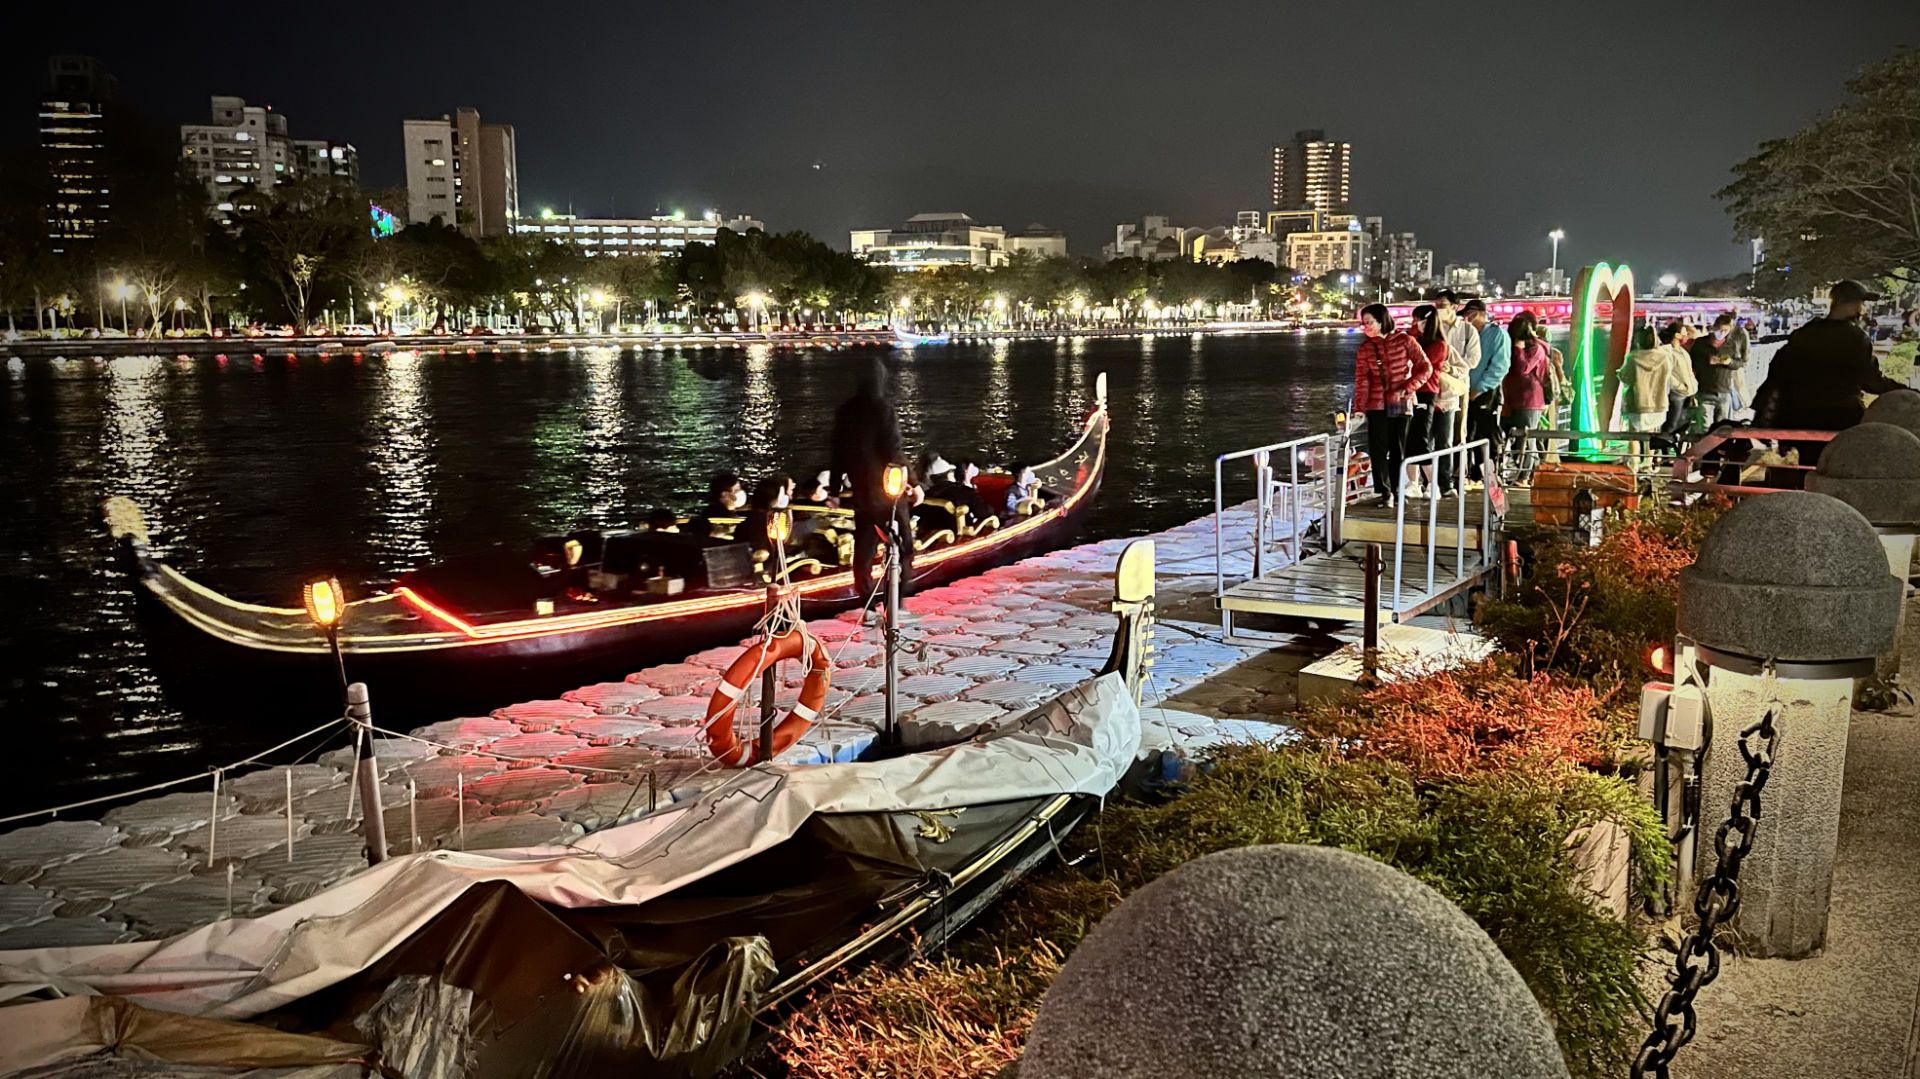 Passengers lined up to board an electric gondola which is docked on the edge of the river. A 2-meter tall heart sculpture is next to them.